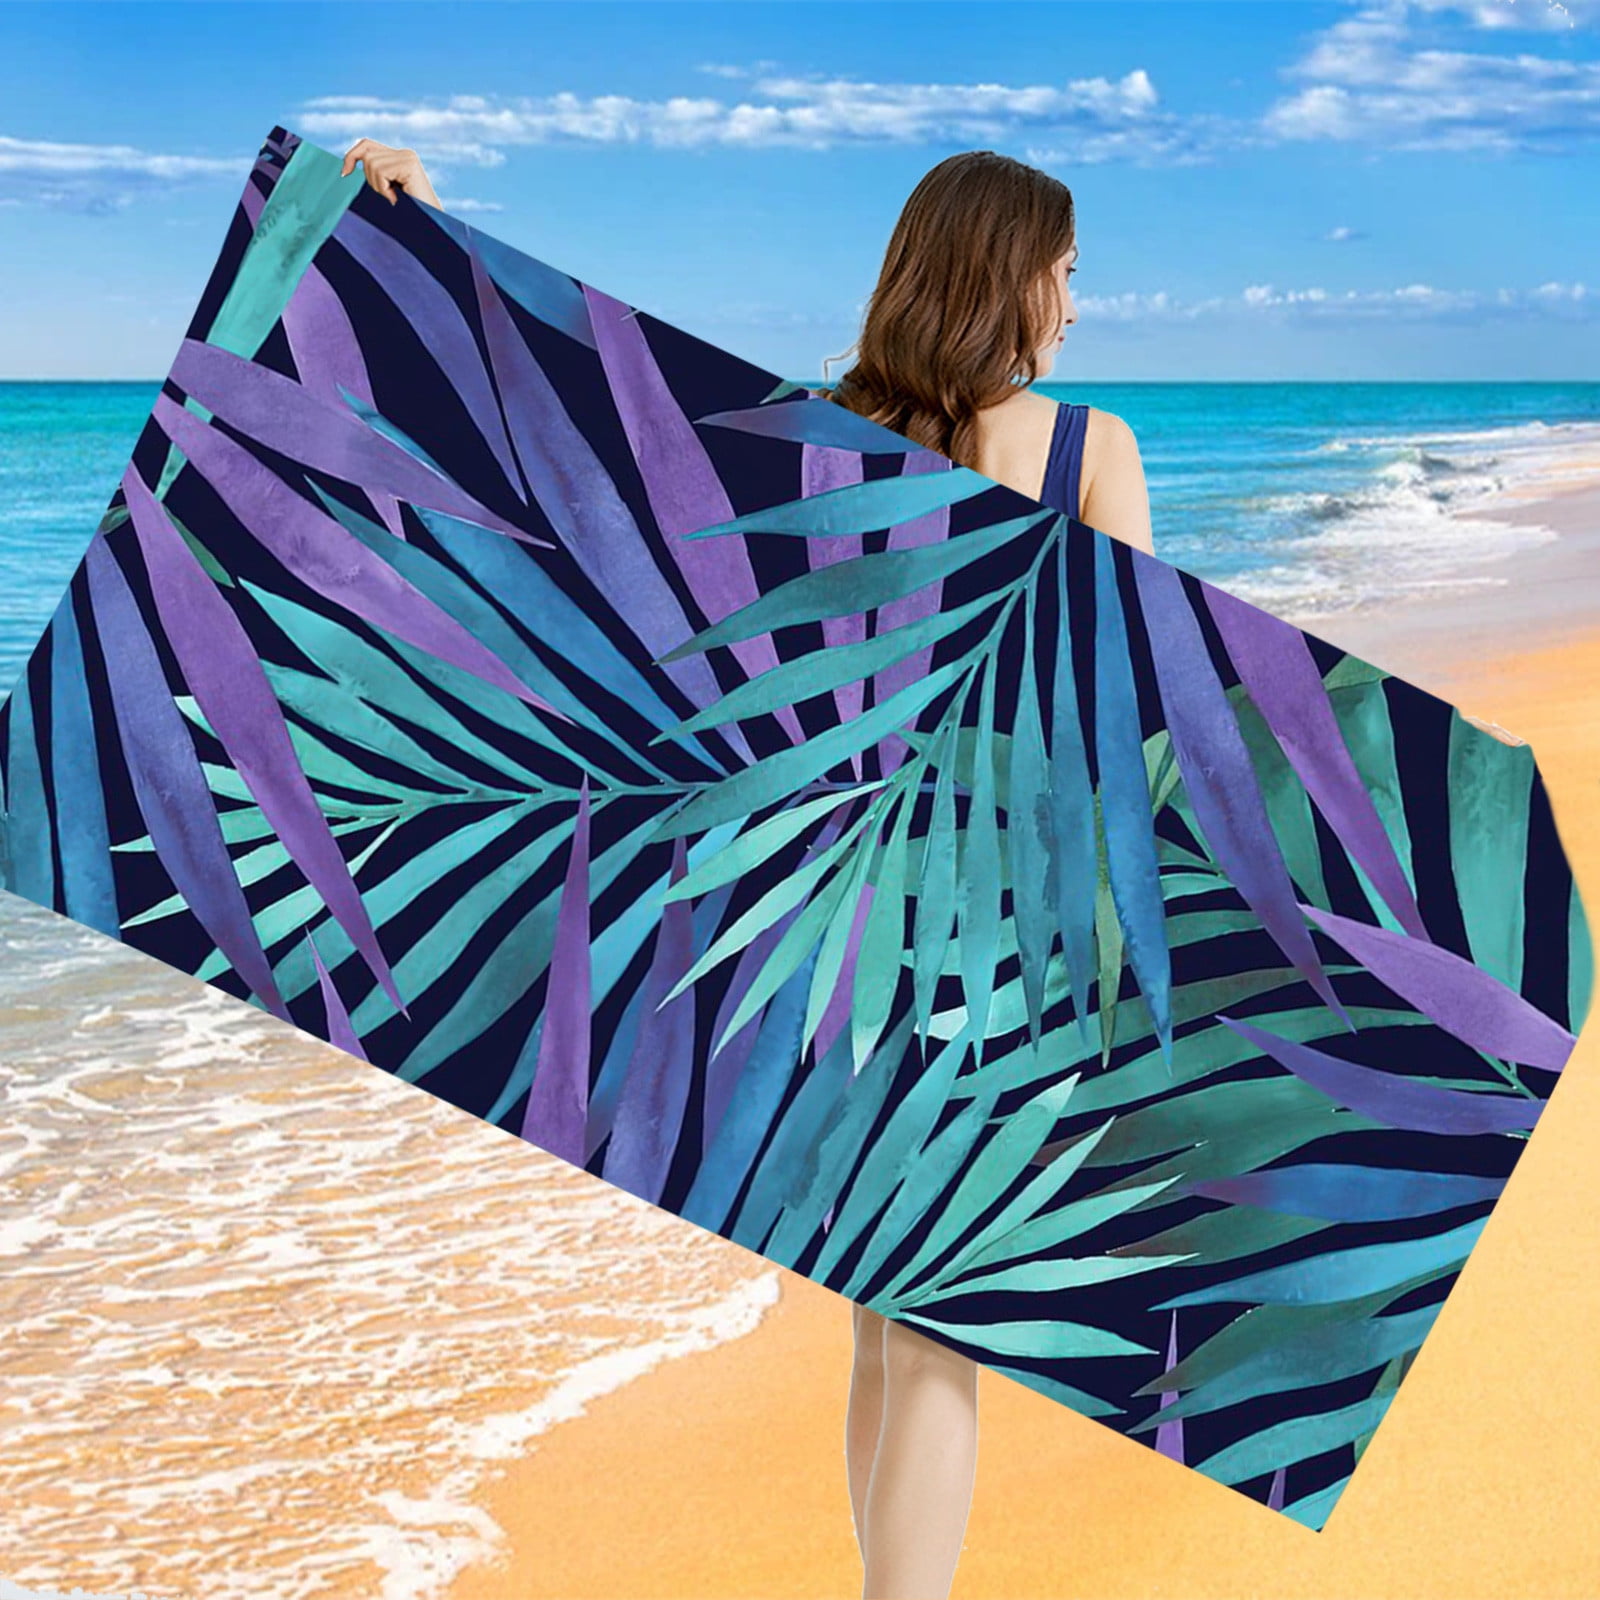 Aueoeo Beach Towel Oversized,Super Absorbent Sand Free Thick Microfiber ...